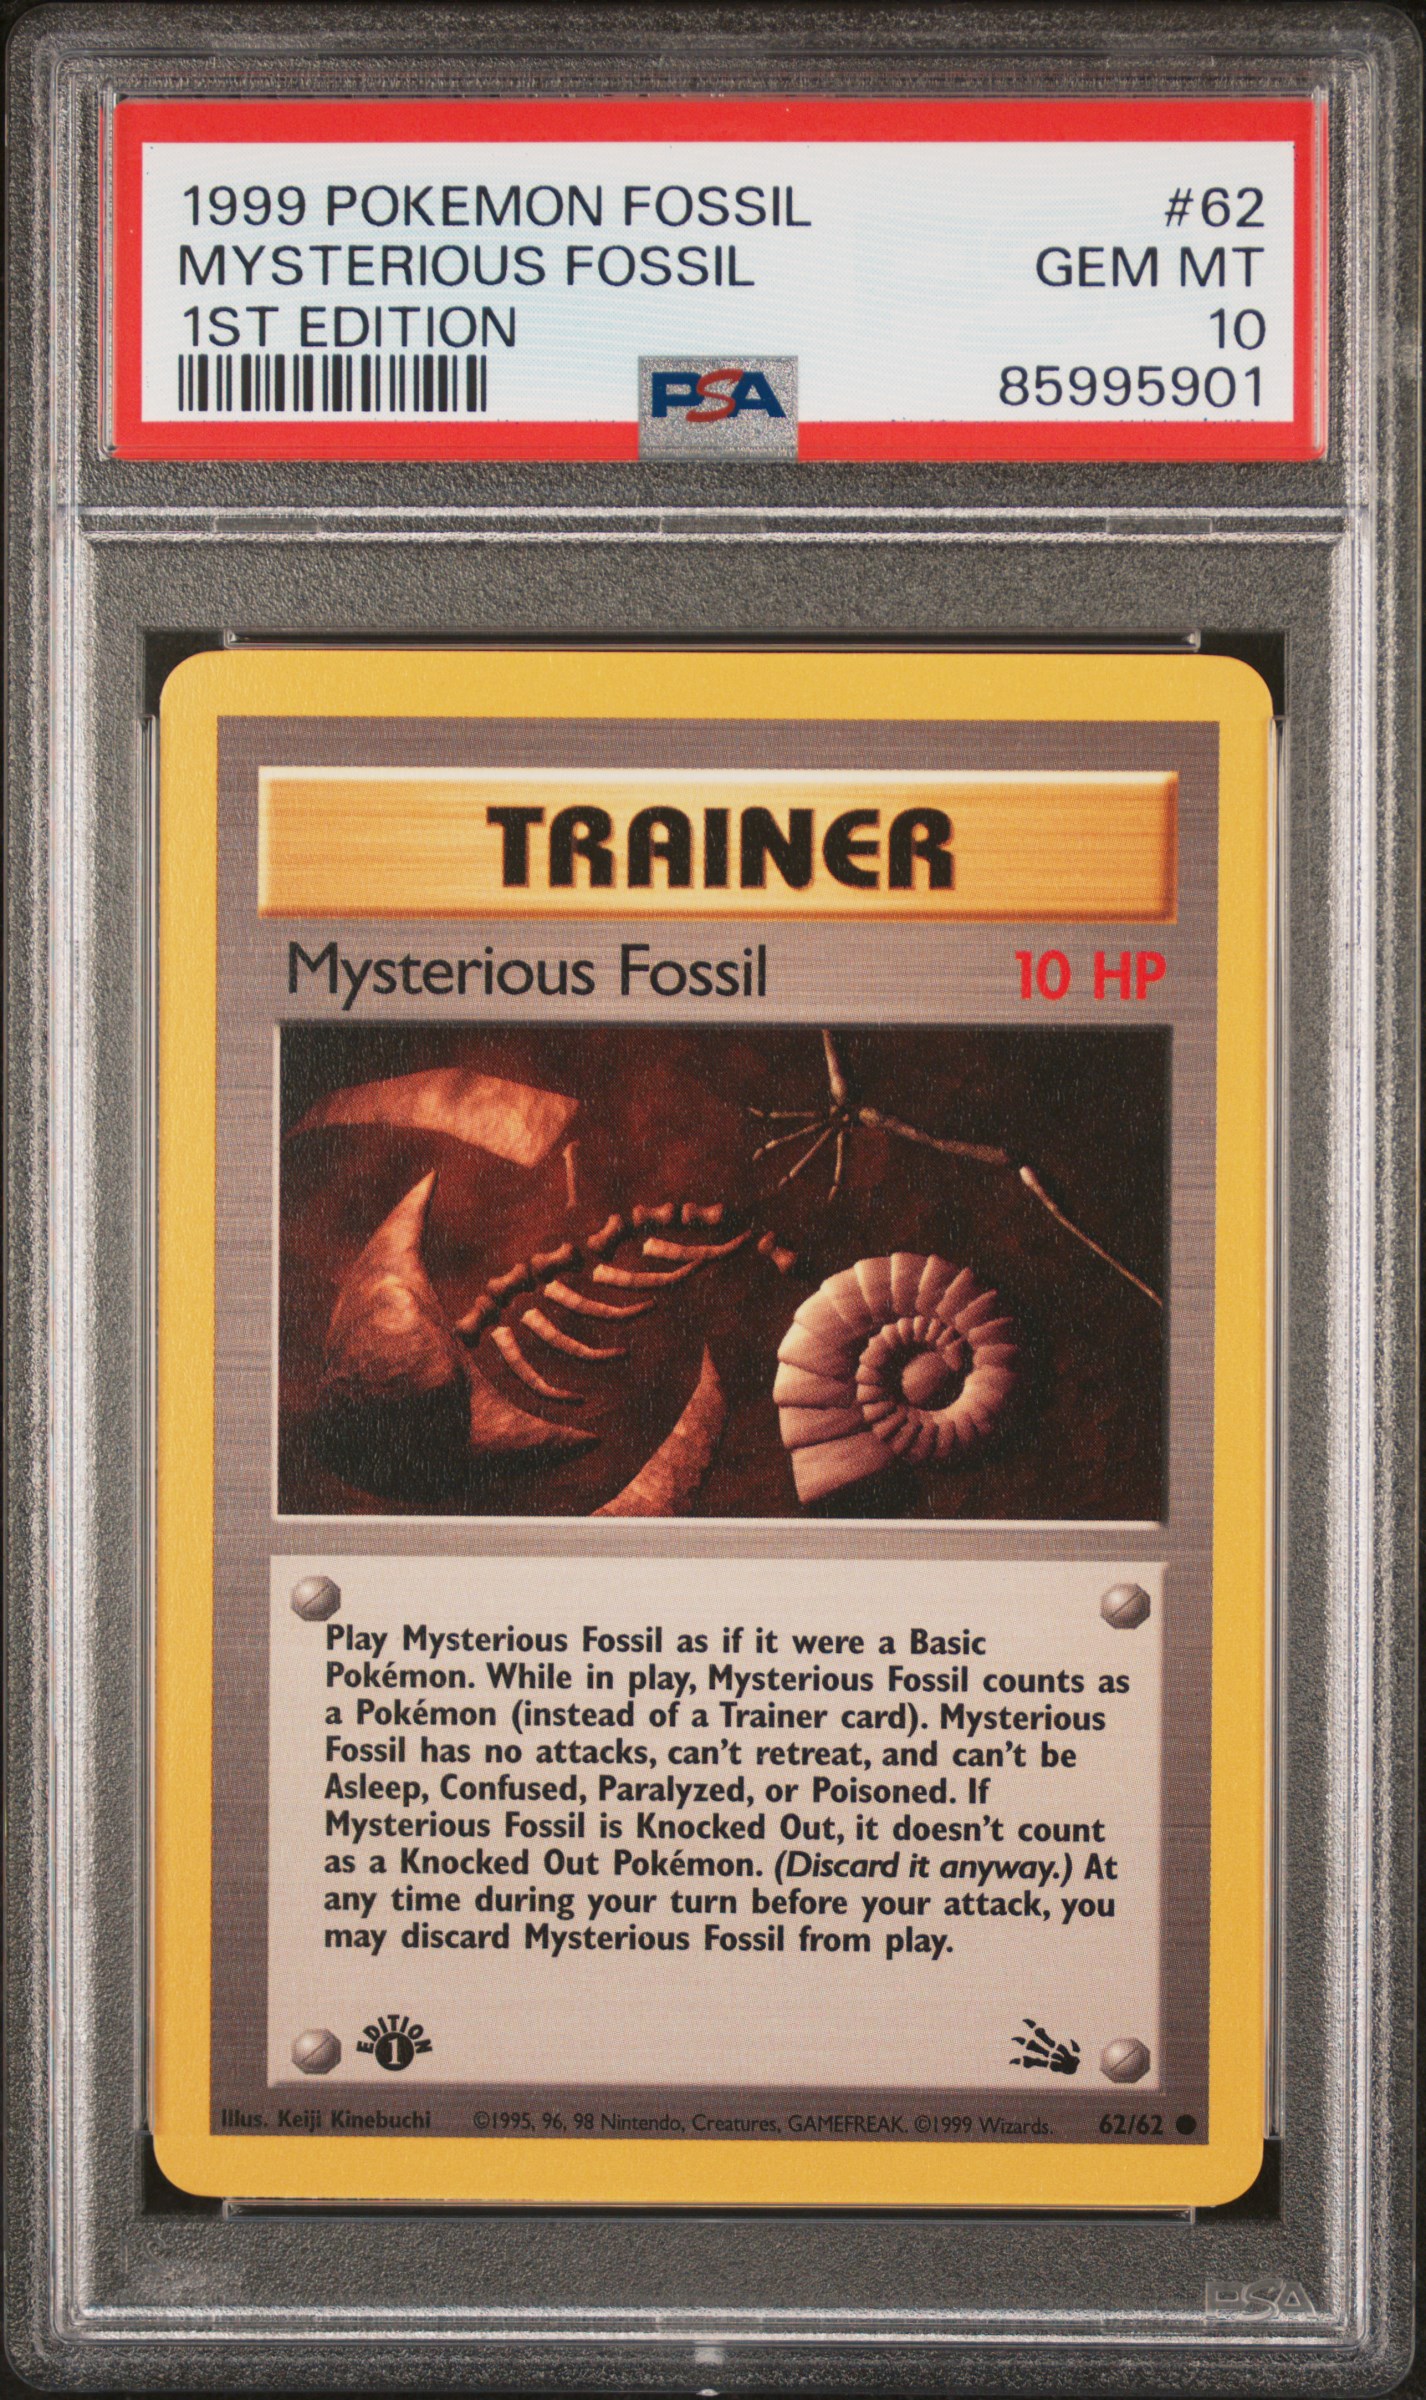 1999 Pokemon Fossil 1st Edition 62 Mysterious Fossil – PSA GEM MT 10